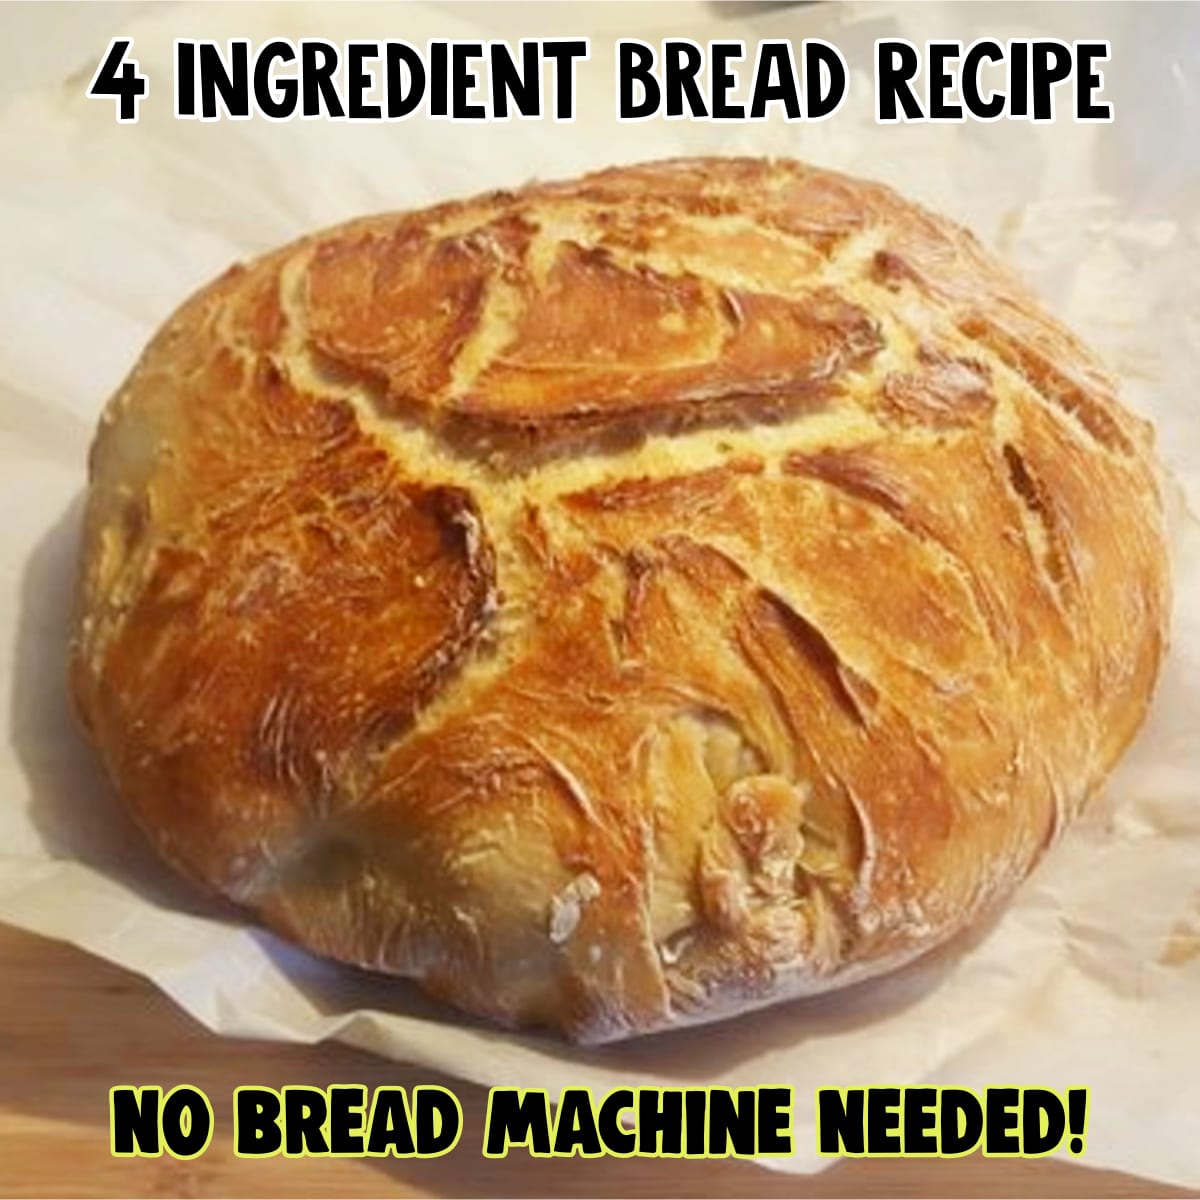 Easy homemade bread recipes without a bread maker or bread machine! This 4 ingredient bread recipe is very simple to make, flavorful and savory just like grandma used to make